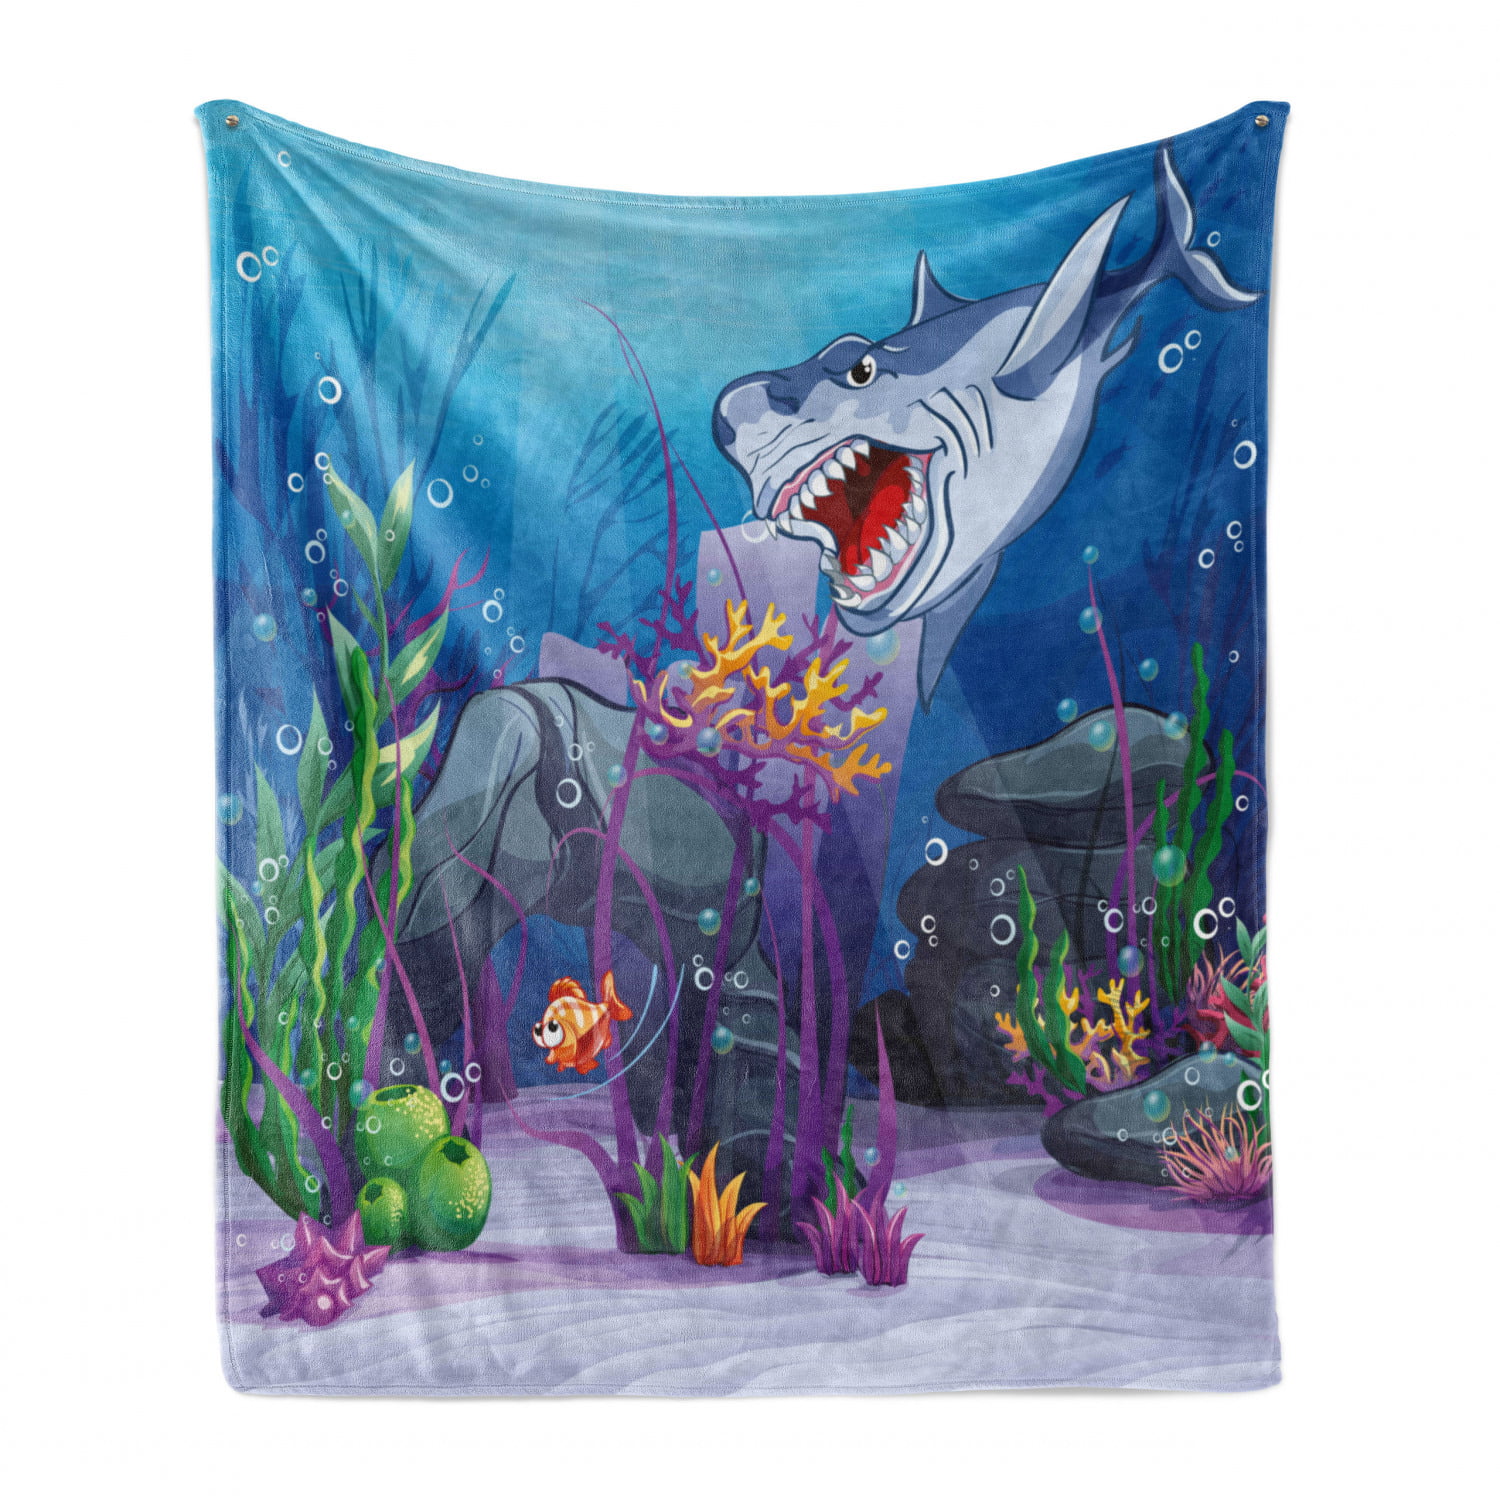 GY Whale Warm Cozy Throw Blanket Cartoon Marine Life and Waves Illustration Art Fuzzy Flannel Throw Blanket for Adults Kids or Pet Suitable for All Season 